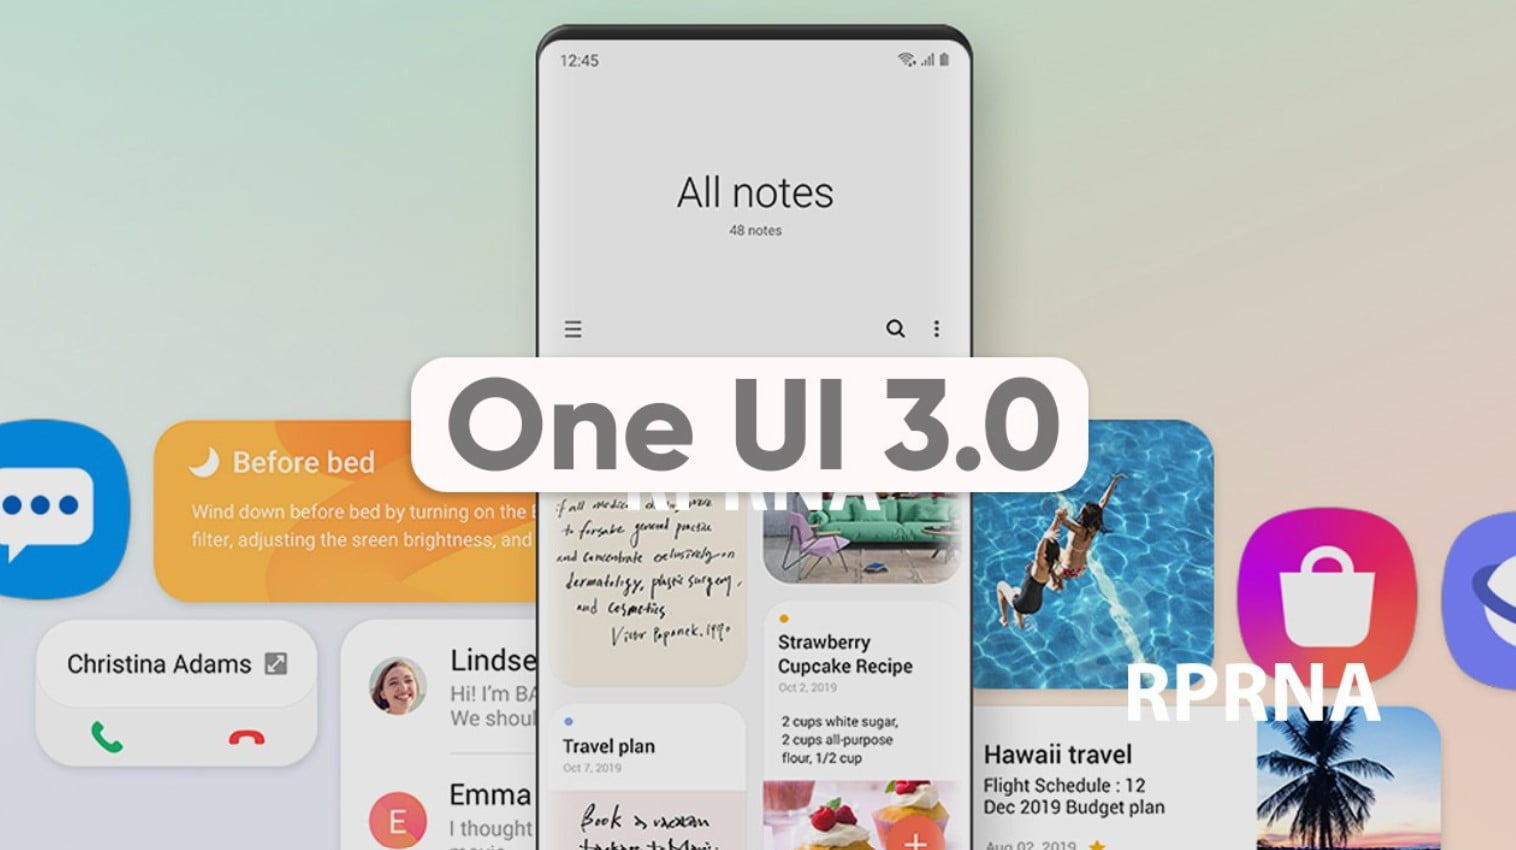 Samsung Rolling Out One UI 3.0